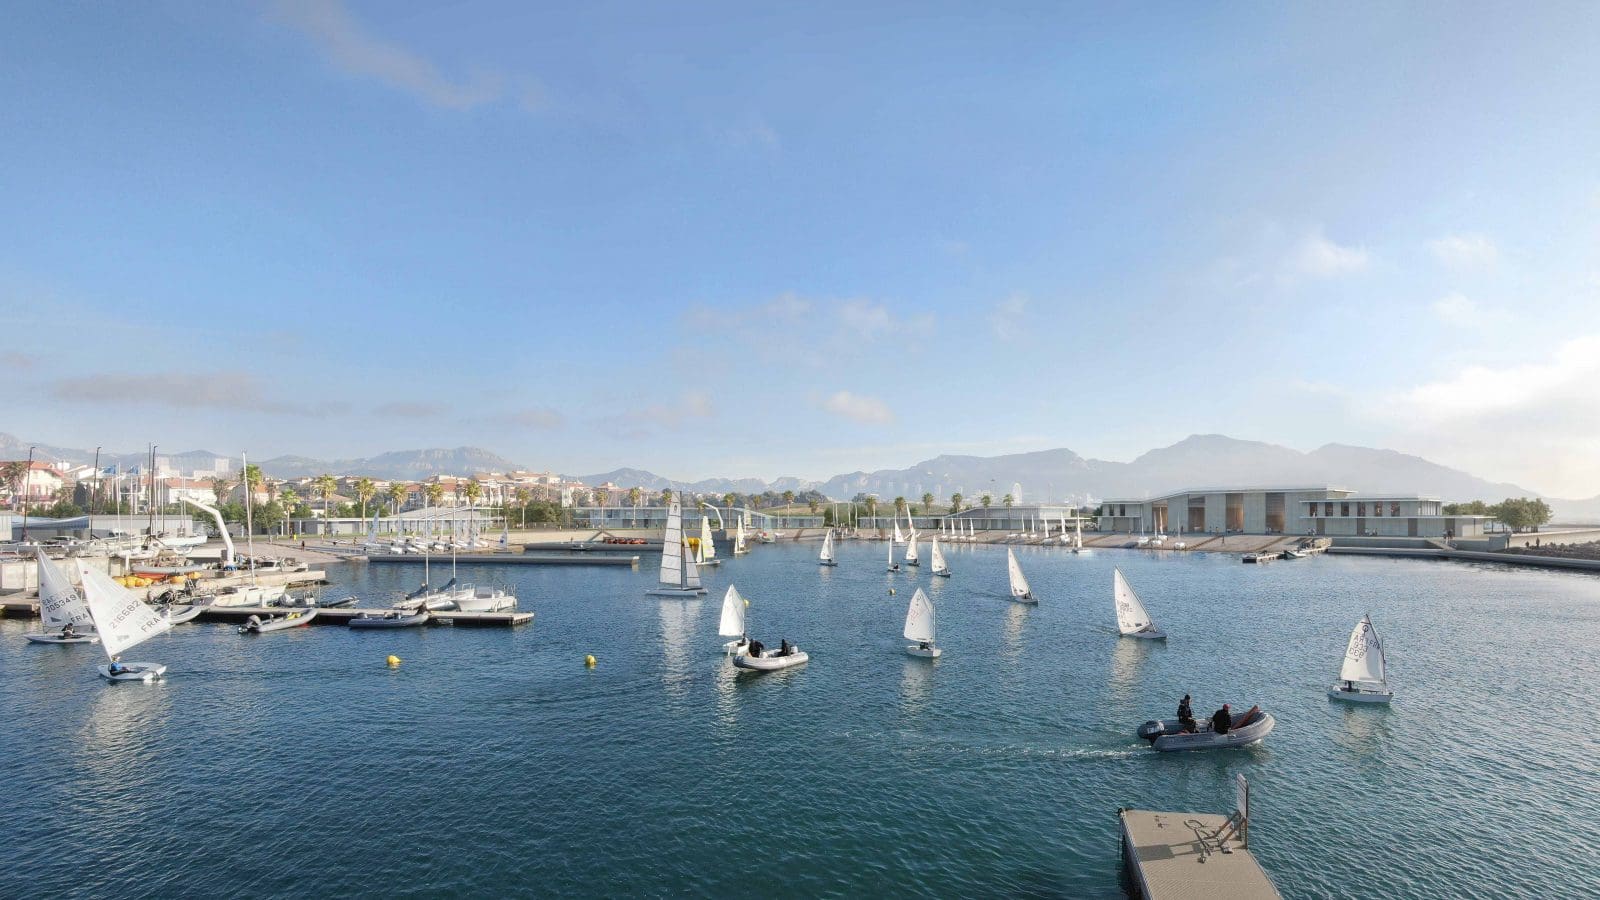 ROUCAS BLANC MARINA FOR 2024 OLYMPIC GAMES #3